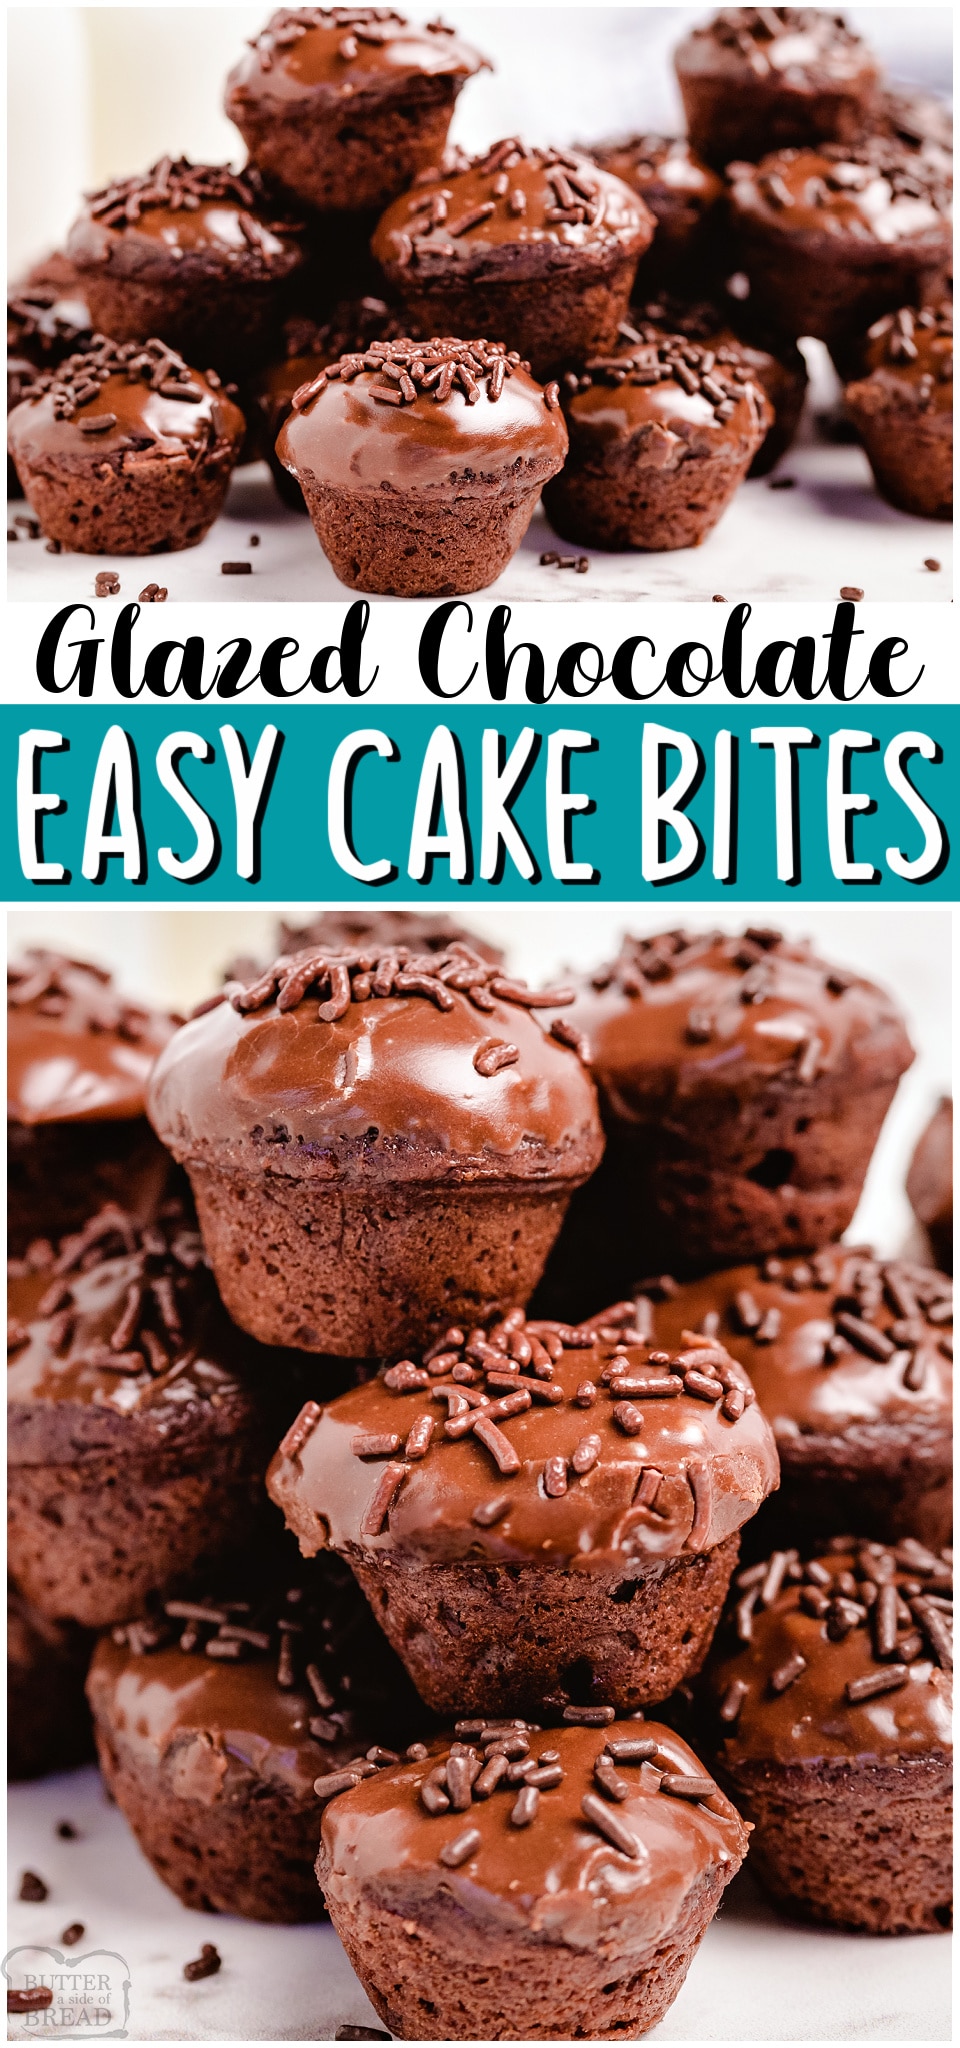 Easy Chocolate Cake Bites are simple, bite-sized chocolate cupcakes that are so easy to make! Super cute & beyond tasty, these mini chocolate cupcakes are always a hit. #chocolate #cake #cupcakes #cakebites #baking #dessert #easyrecipe from BUTTER WITH A SIDE OF BREAD